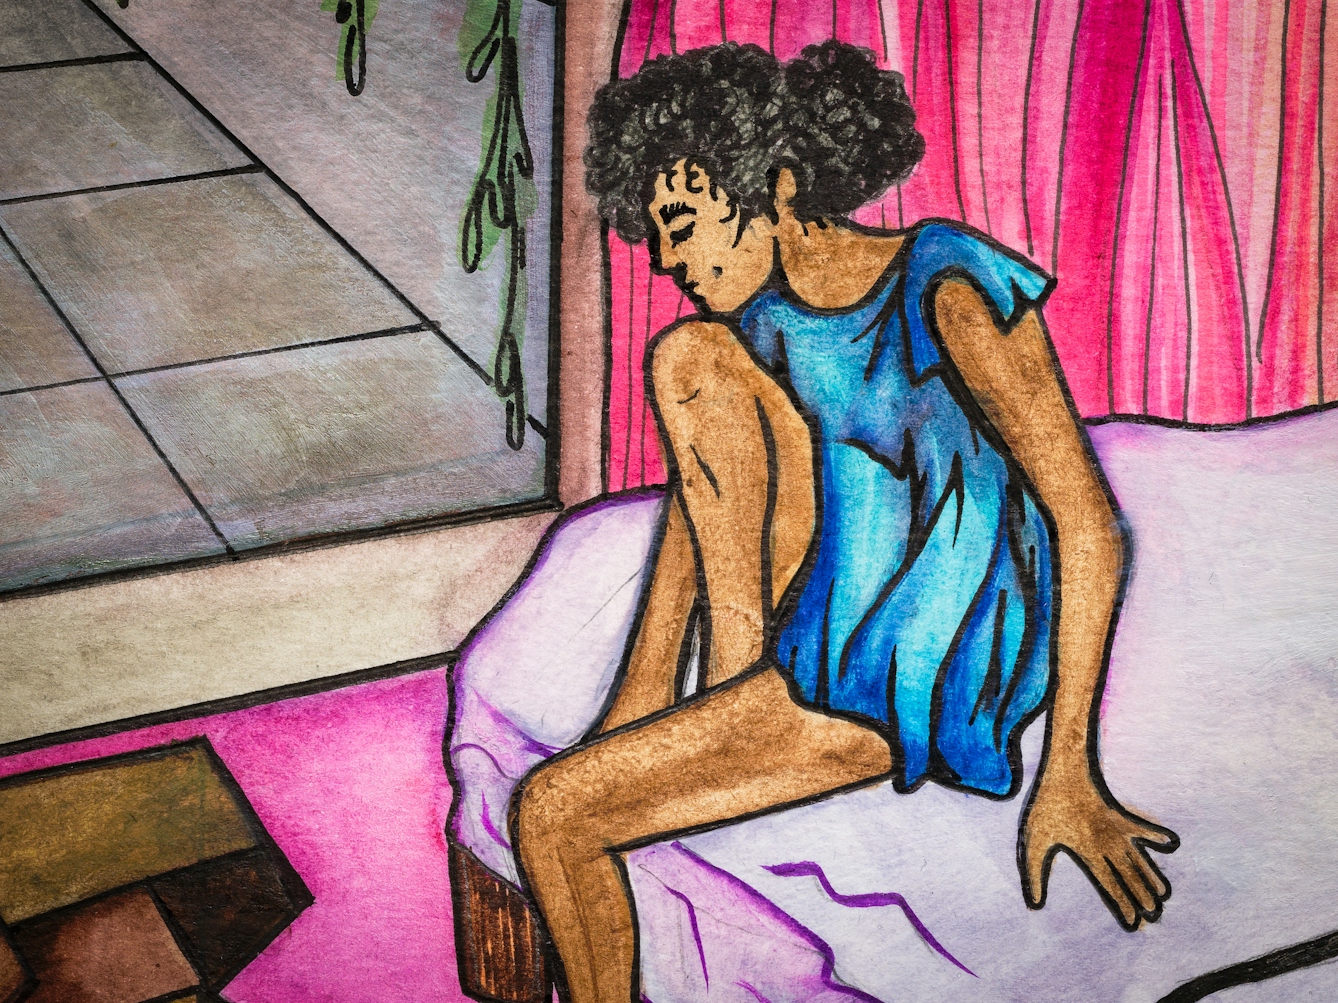 Detail from larger artwork made with paint and ink on textured watercolour paper. The artwork shows a scene in a bedroom with predominantly hues of pink, mauve and yellows. To the right is a double mattress on the pink carpet. Sat on the bed is a young woman in a blue dress.